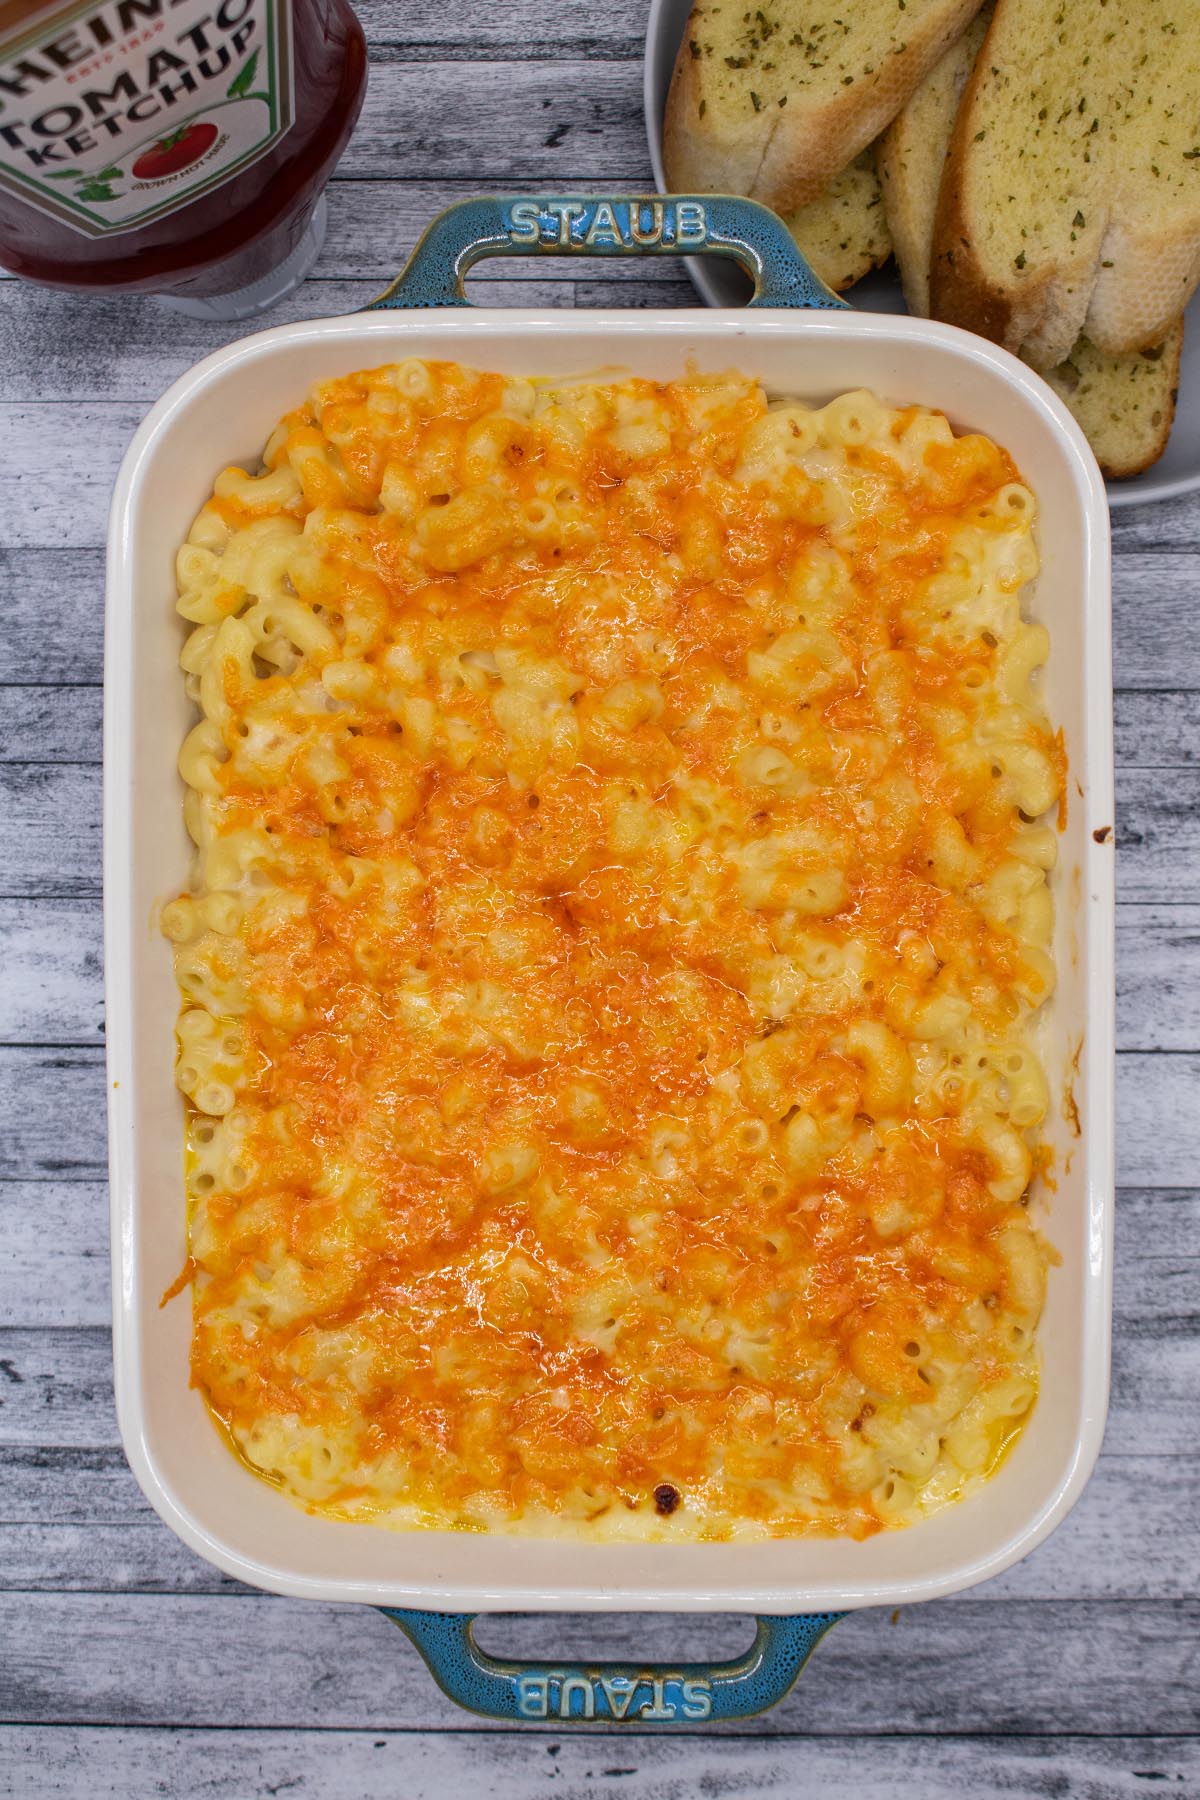 Macaroni cheese in rectangle dish next to garlic bread slices and tomato ketchup